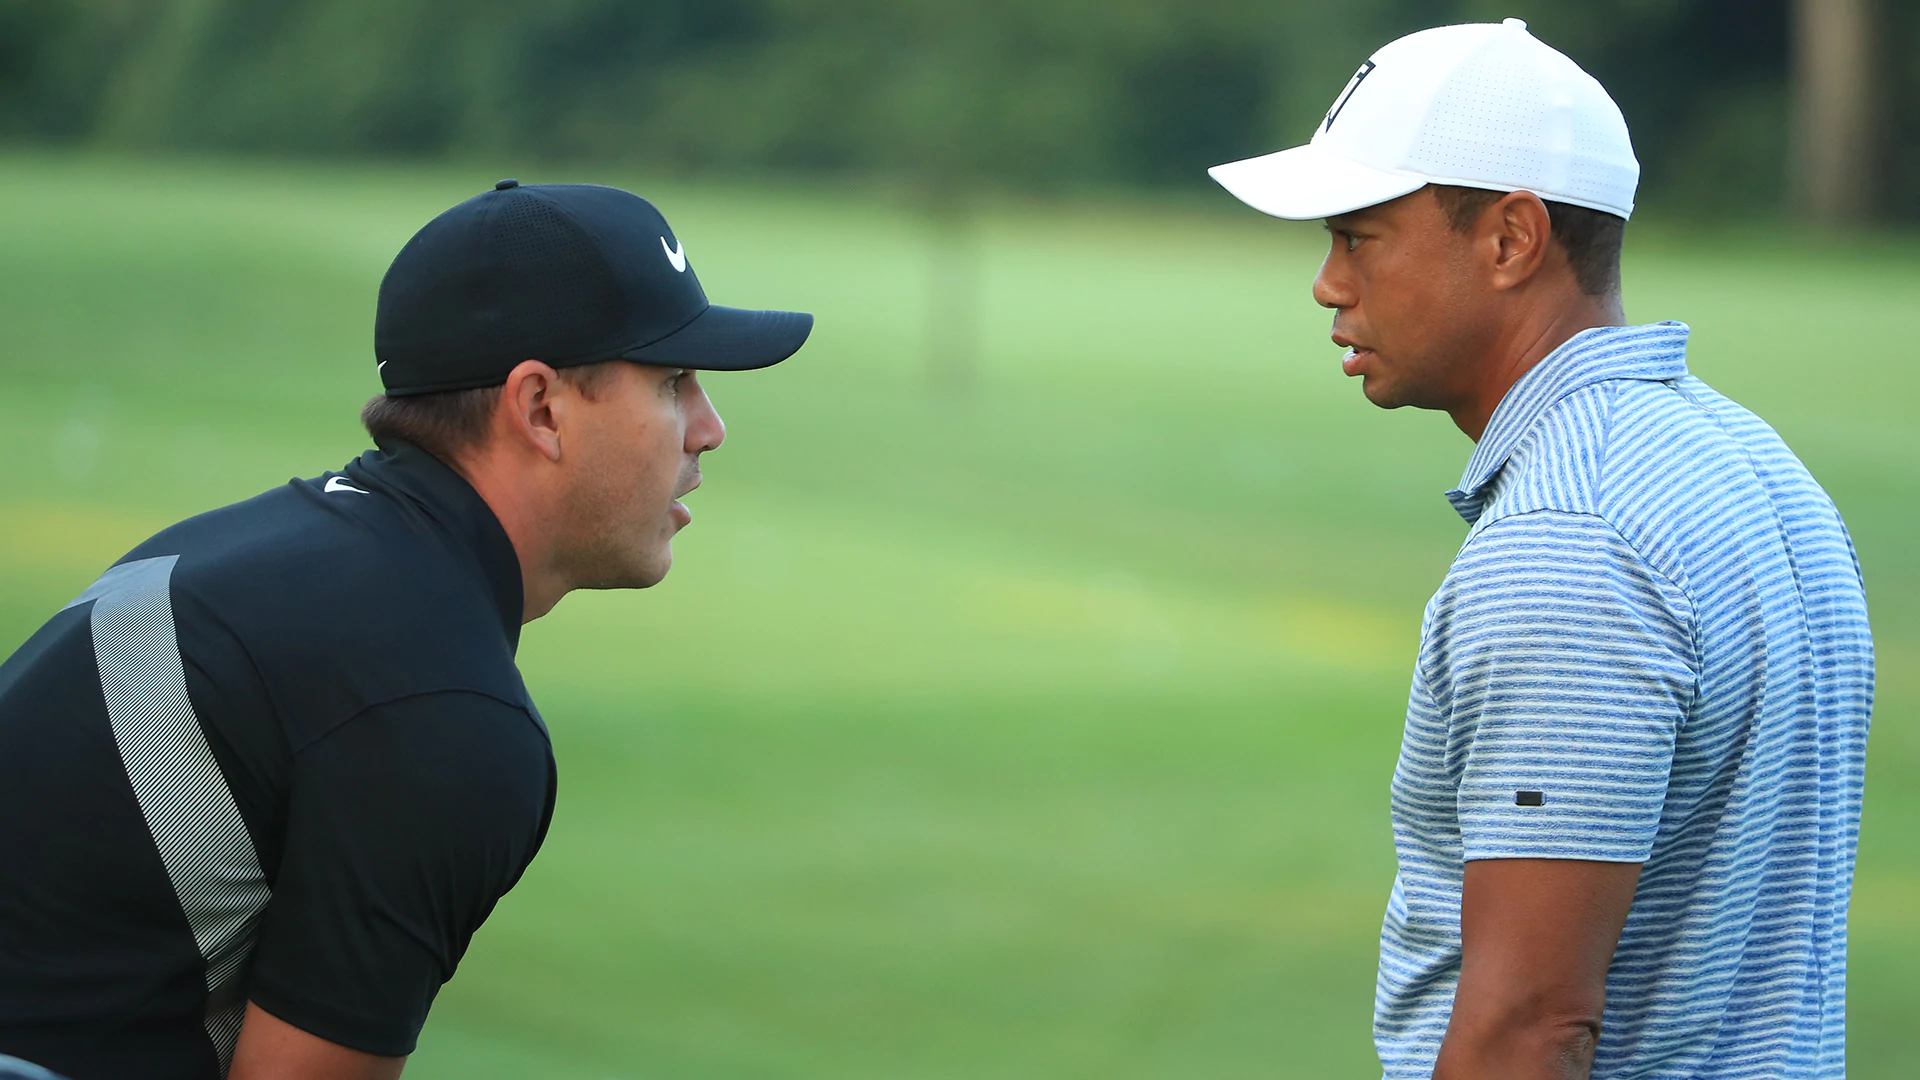 Memorial featured groups: Brooks Koepka with Tiger and Rory, not Bryson